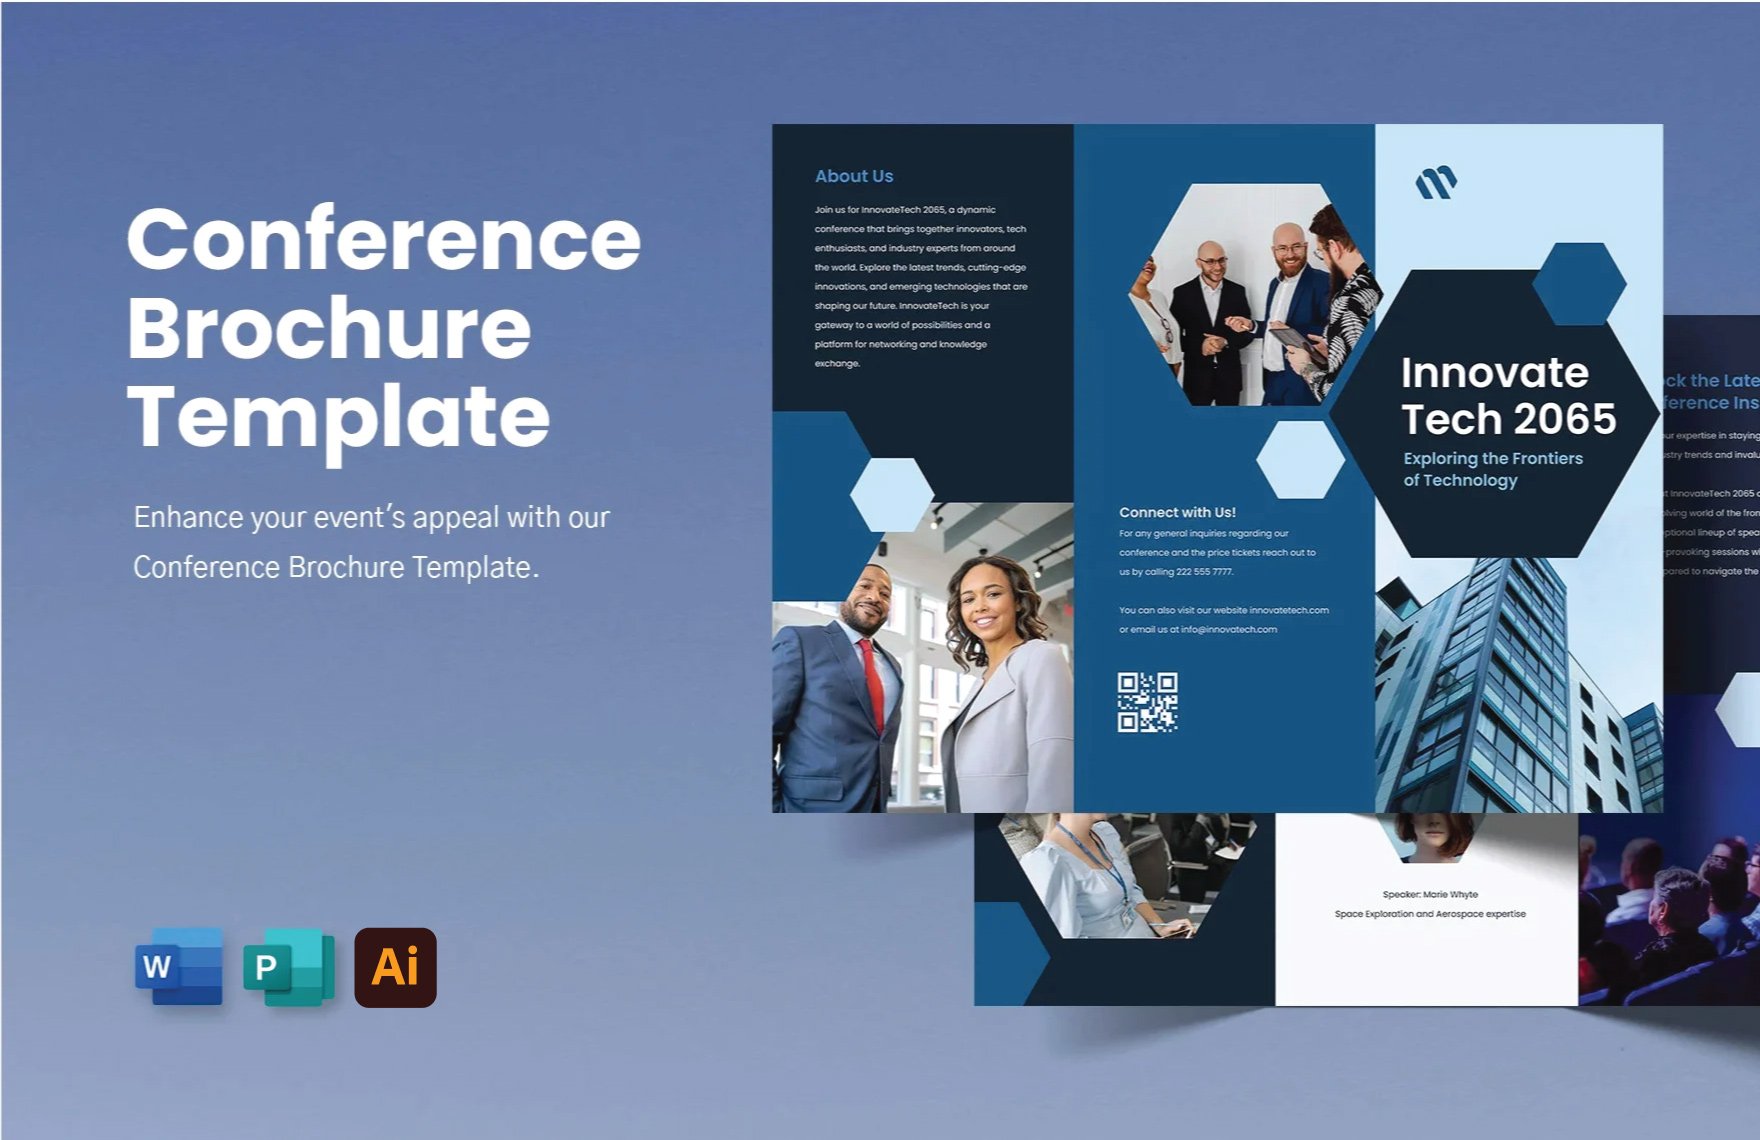 Conference Brochure Template in Word, Illustrator, Publisher